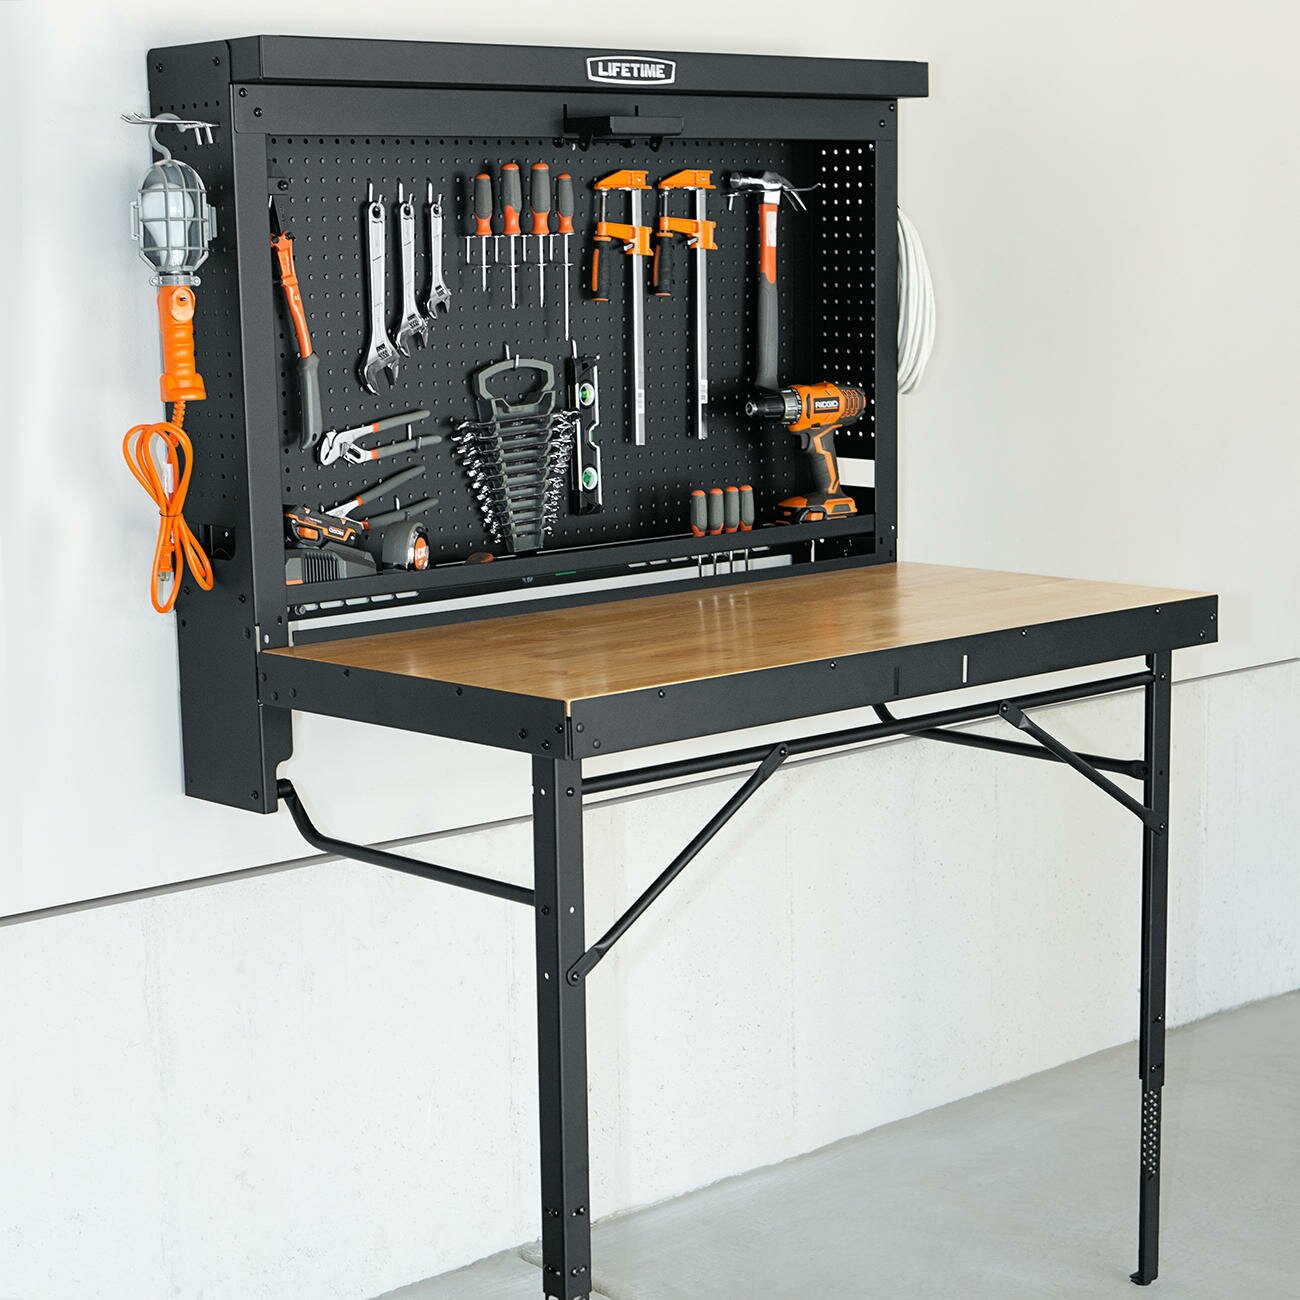 Wall Mounted Folding Workbench for Exciting Workspace Furniture Ideas: Collapsible Work Bench | Hinged Workbench | Wall Mounted Folding Workbench